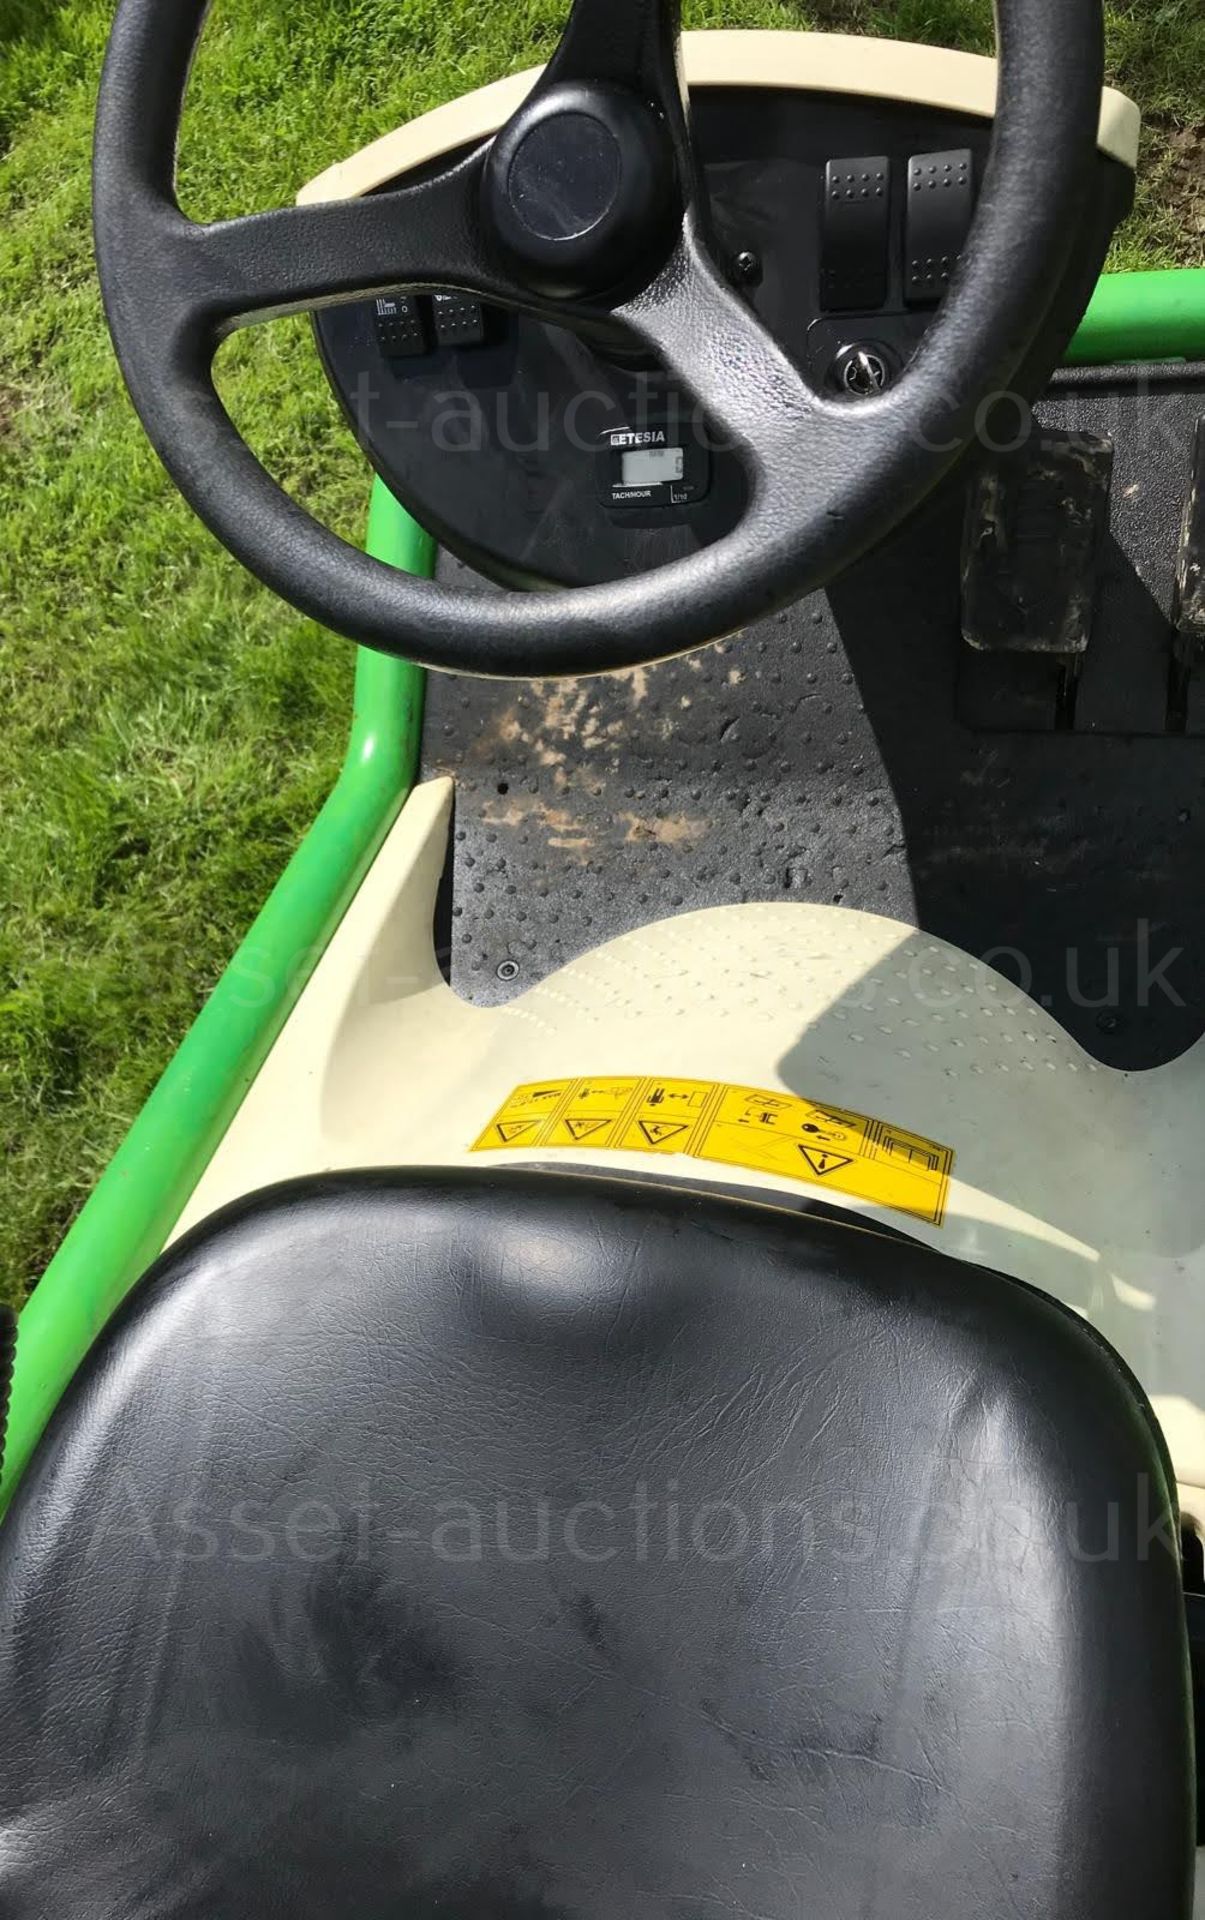 2014 ETESIA HYDRO 80 RIDE ON LAWN MOWER C/W REAR GRASS COLLECTOR, RUNS, DRIVES AND CUTS *PLUS VAT* - Image 3 of 5